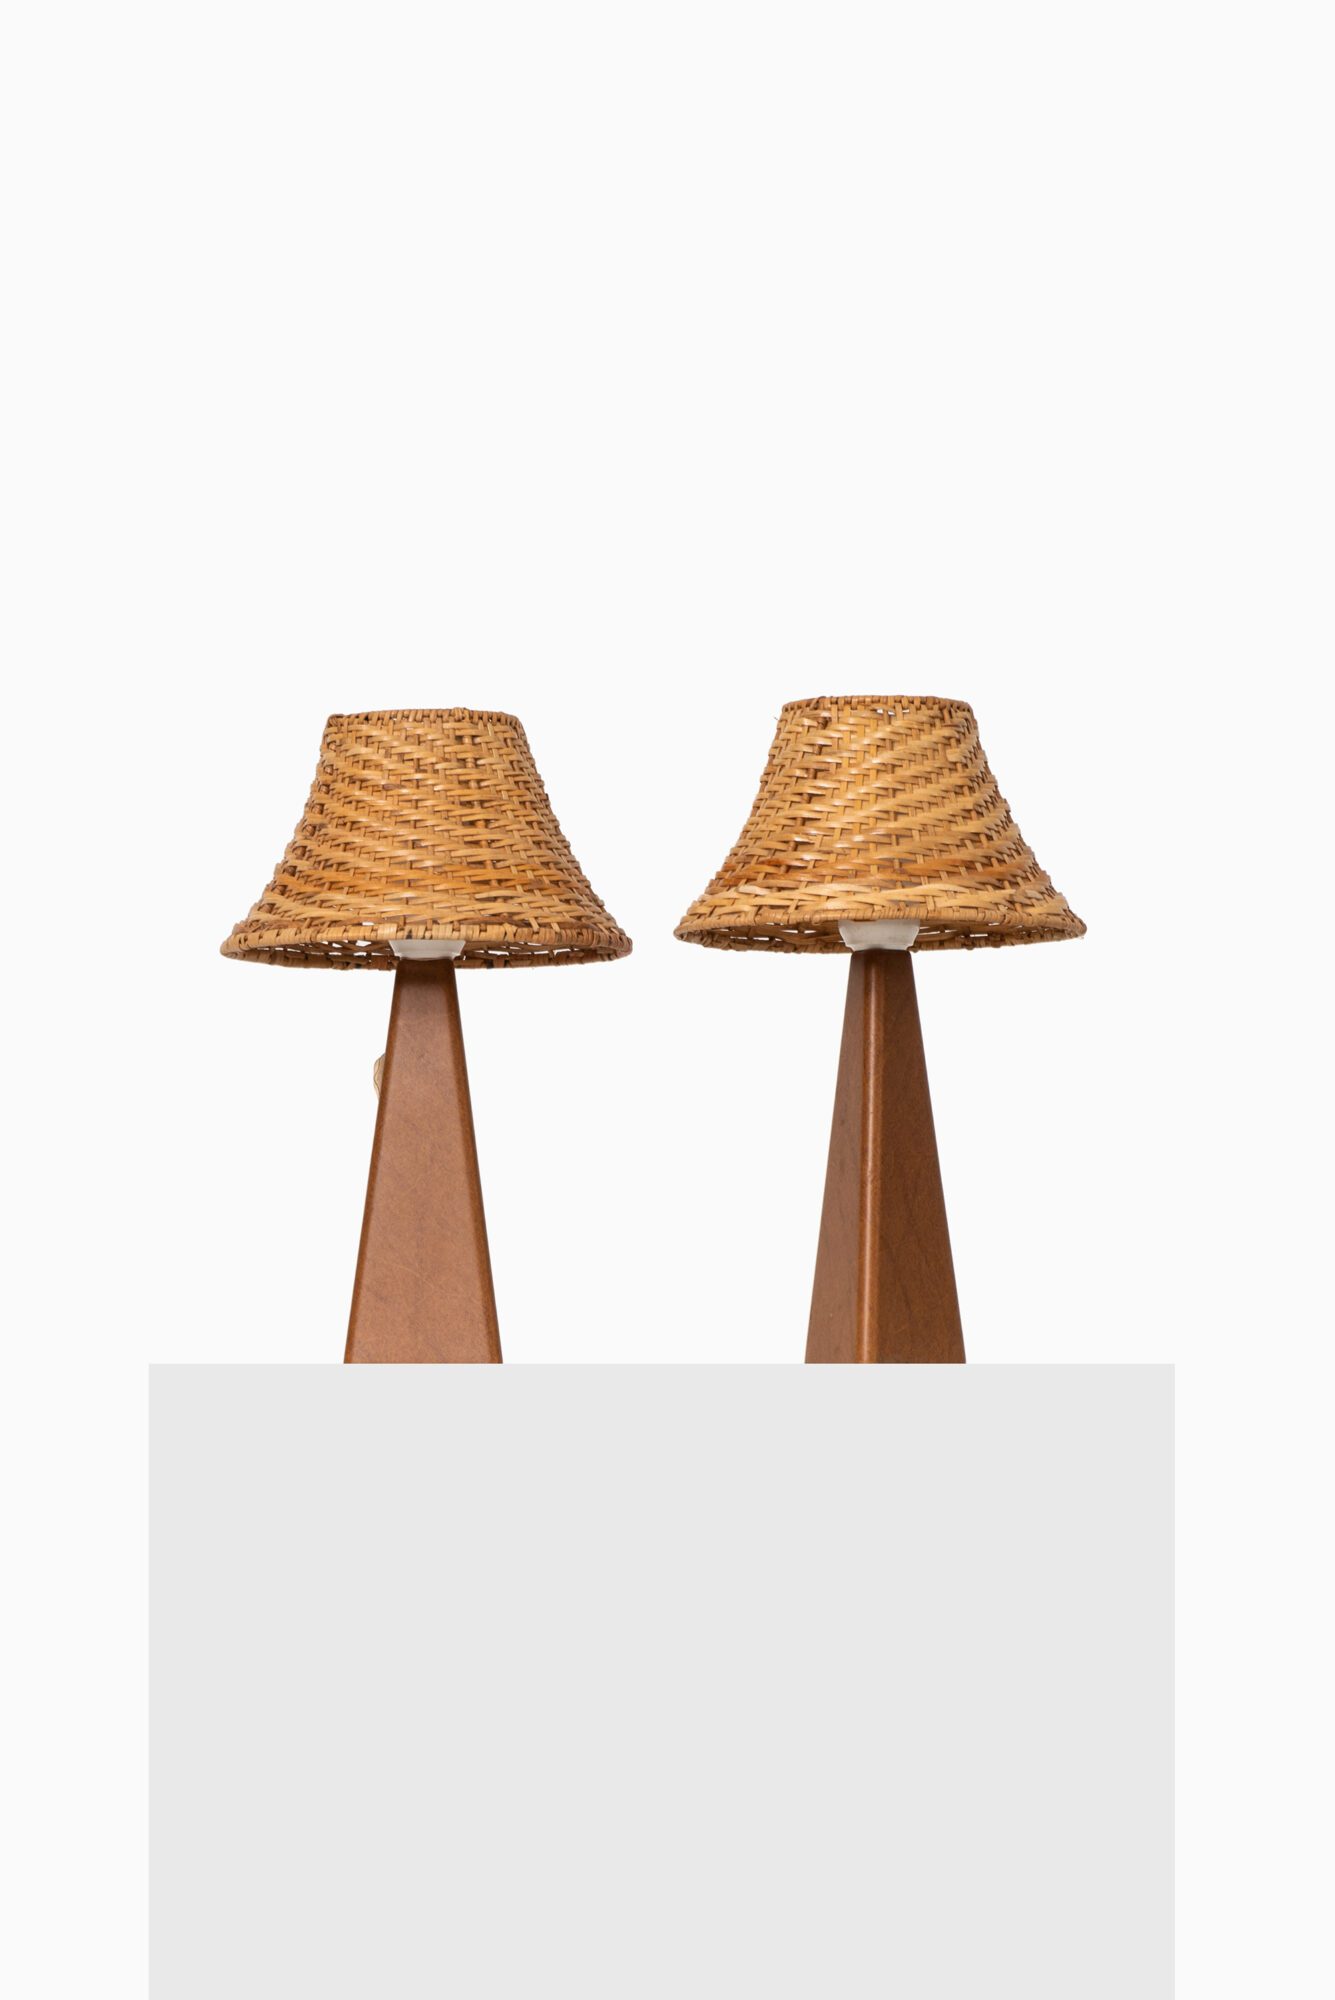 AB Armaturhantverk table lamps in leather at Studio Schalling